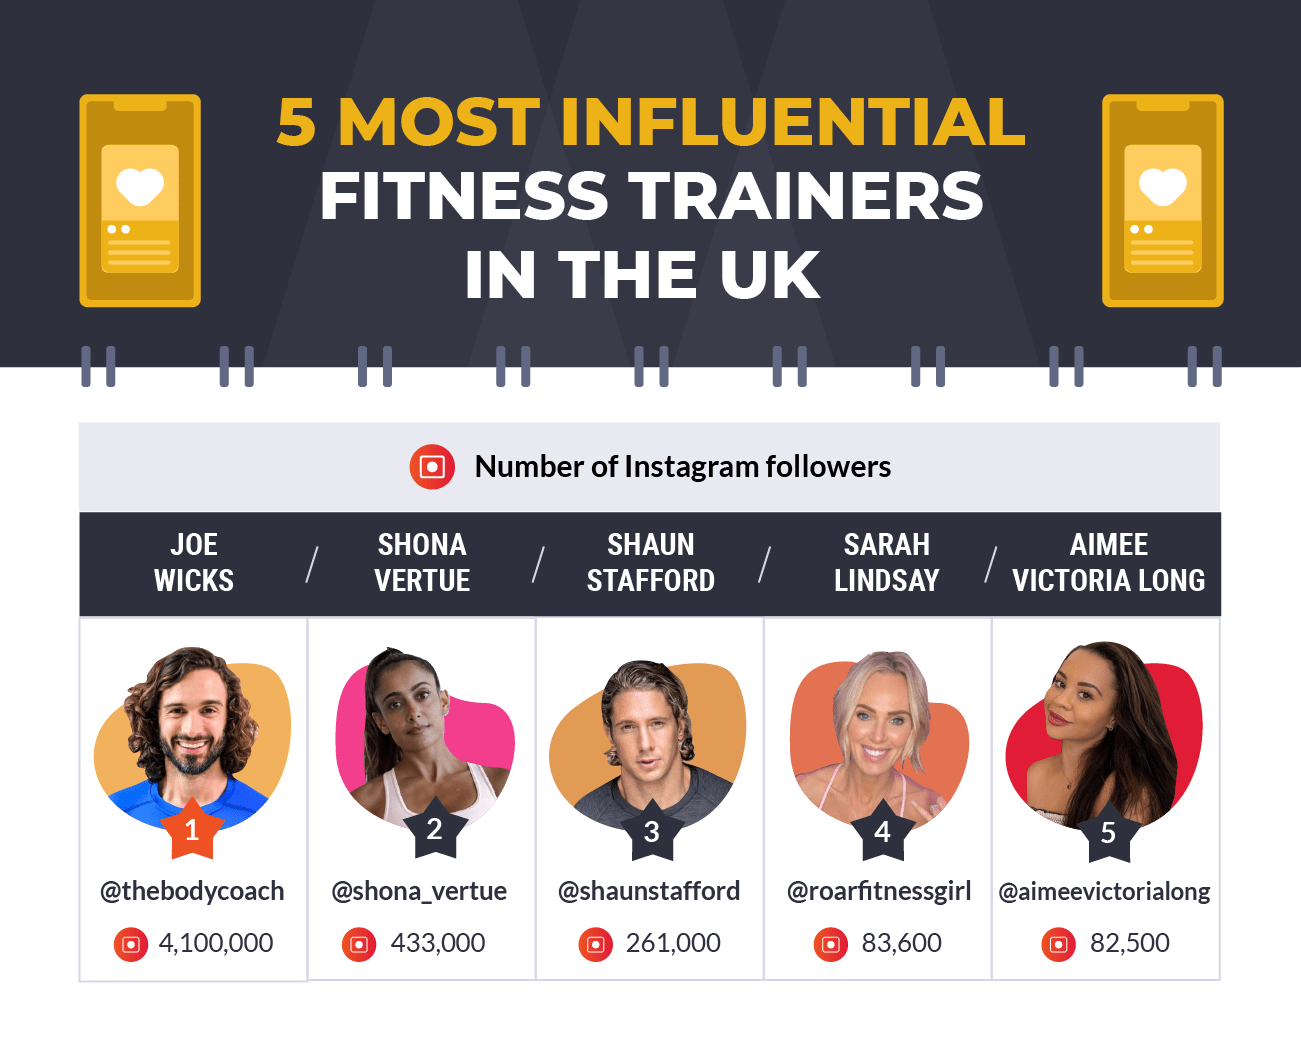 5 most influential fitness trainers in the UK